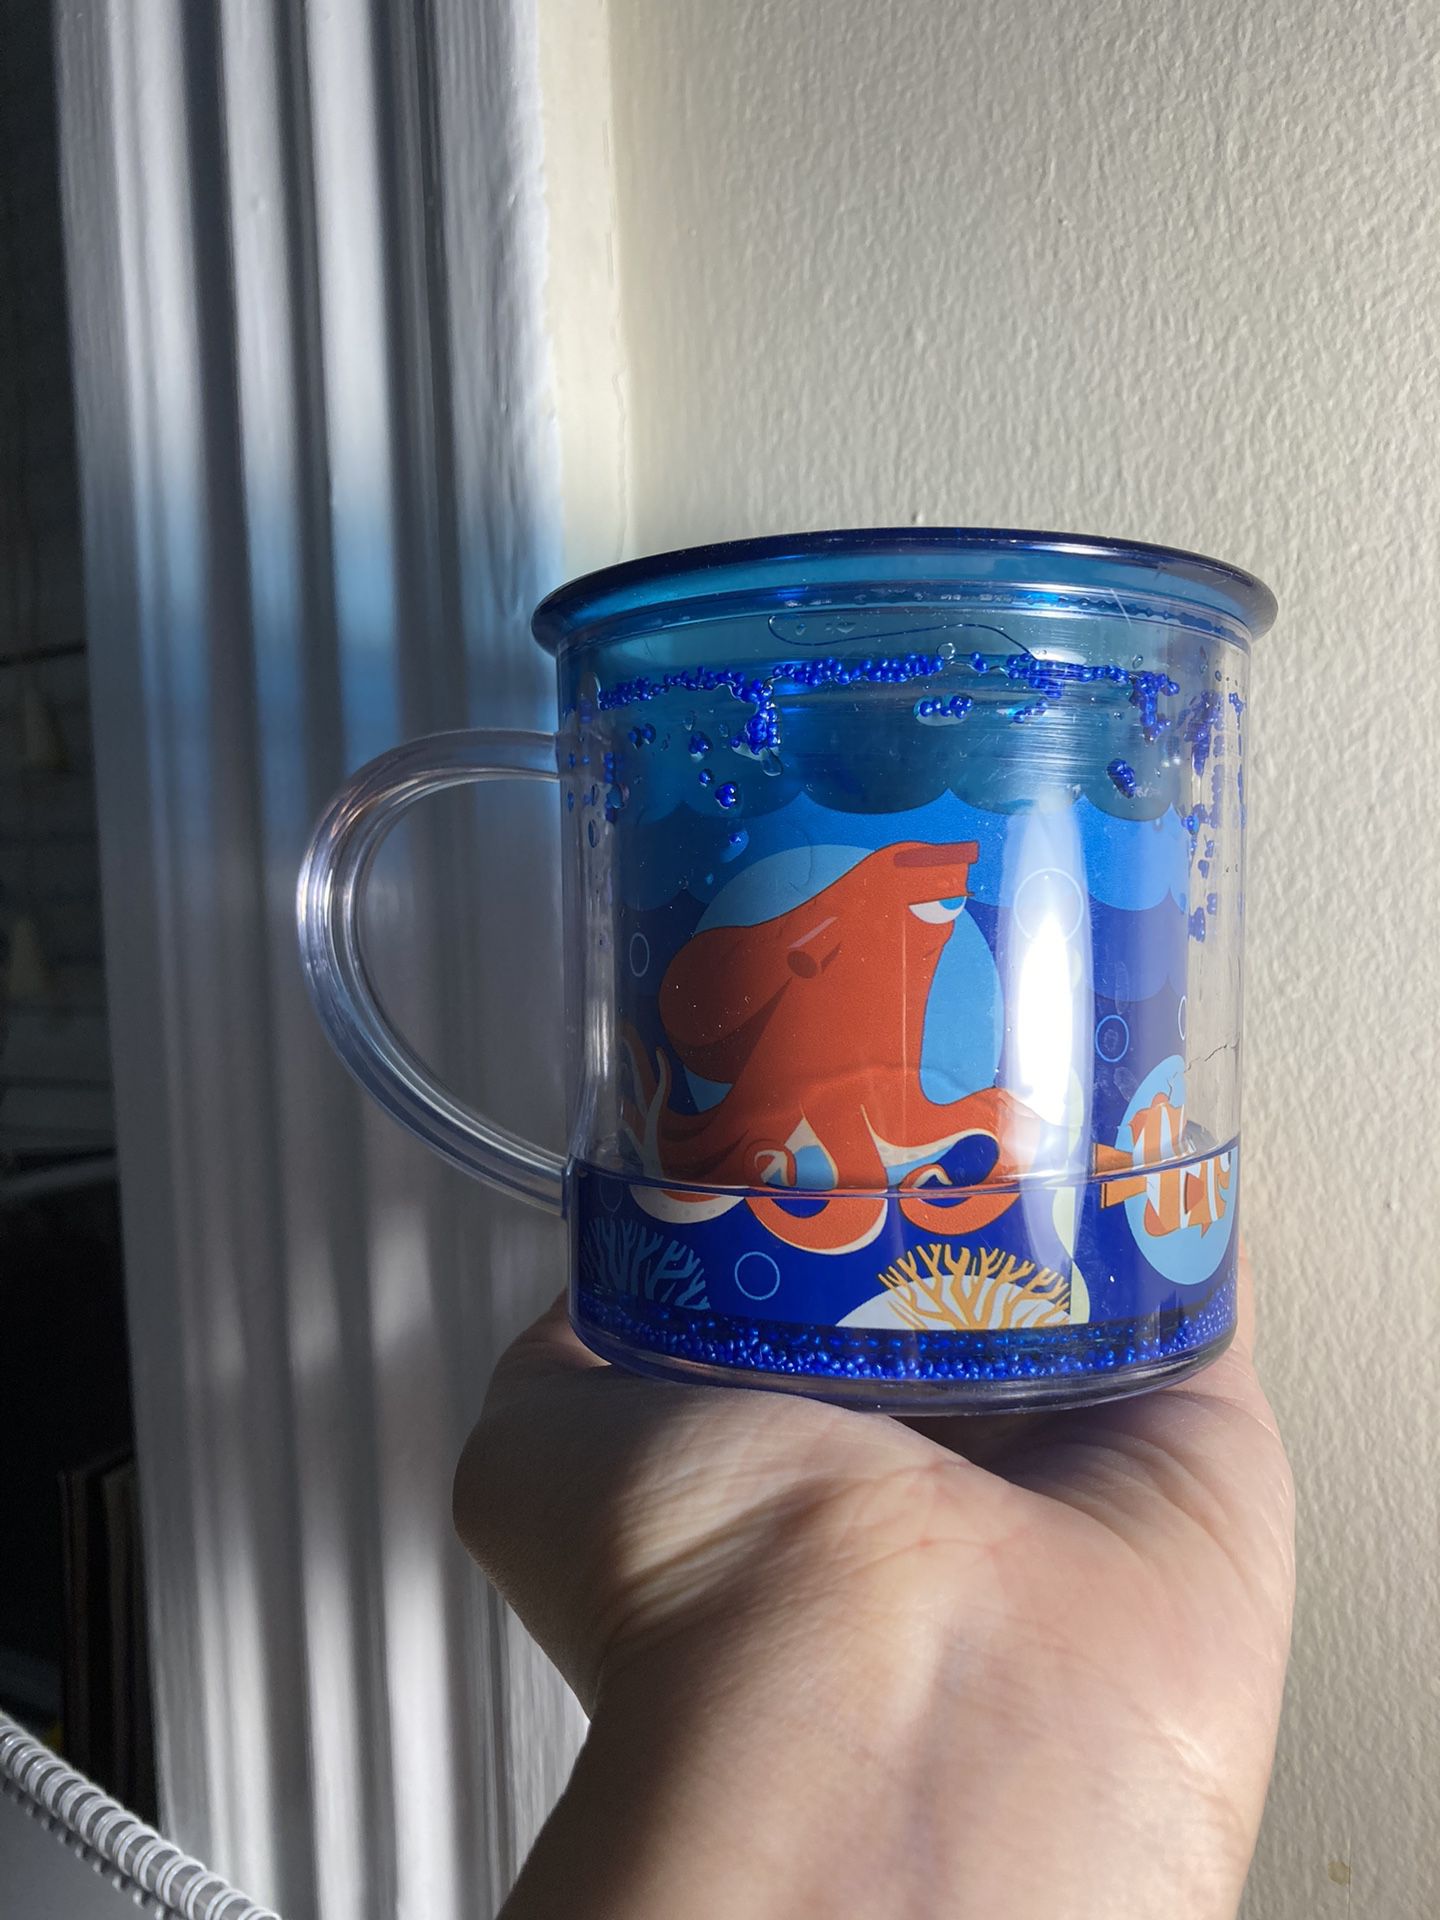 Disney Finding Nemo And Finding Dory Cup Mug